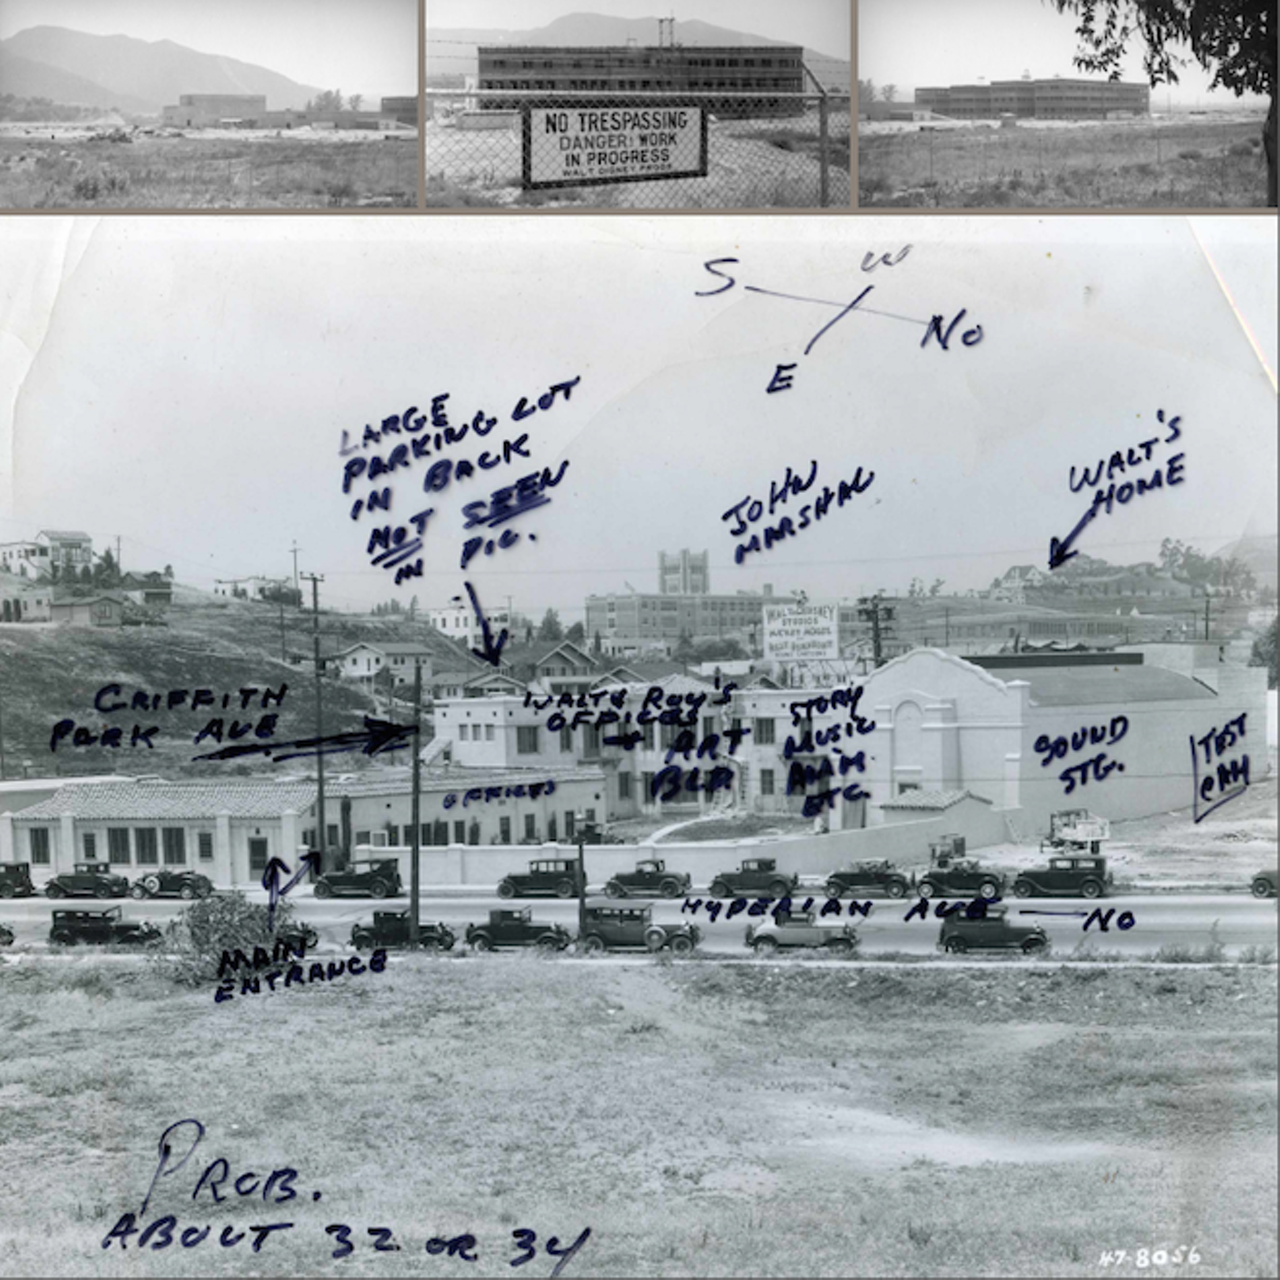 Photos taken by Schultheis of the old Disney Studios. (bottom, ~1932-34) and the construction of the new Disney Studios (top, 1939)Bottom image courtesey of Robert Swarthe via Max MorganTop image courtesy of the Los Angeles Public Library Photo Collection